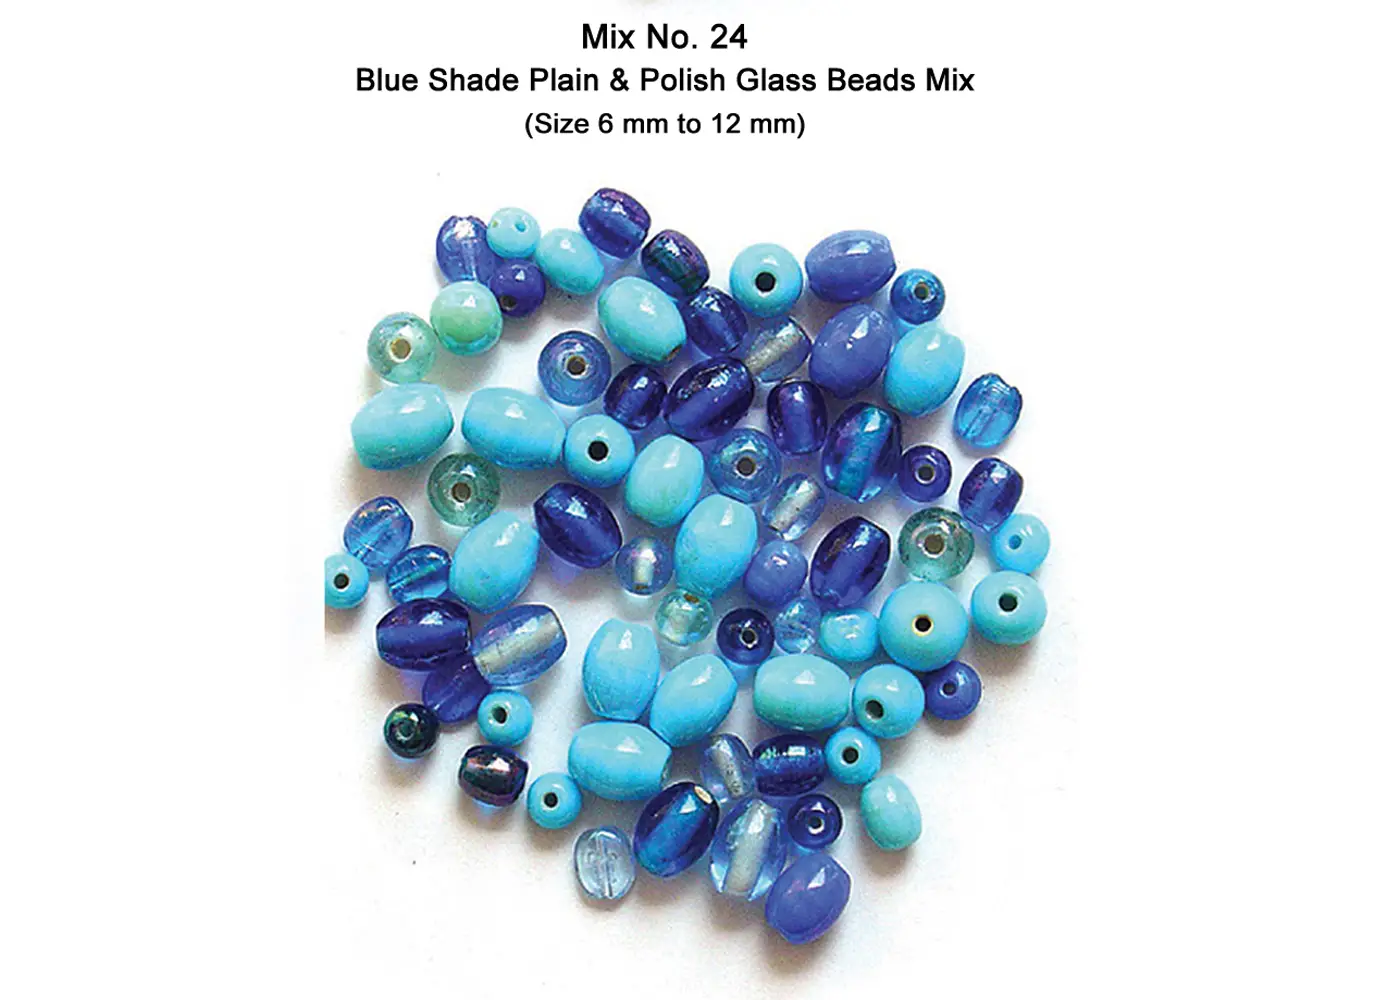 Blue Color Plain with Polish Glass Beads Mix (Size 6 mm to 12 mm)